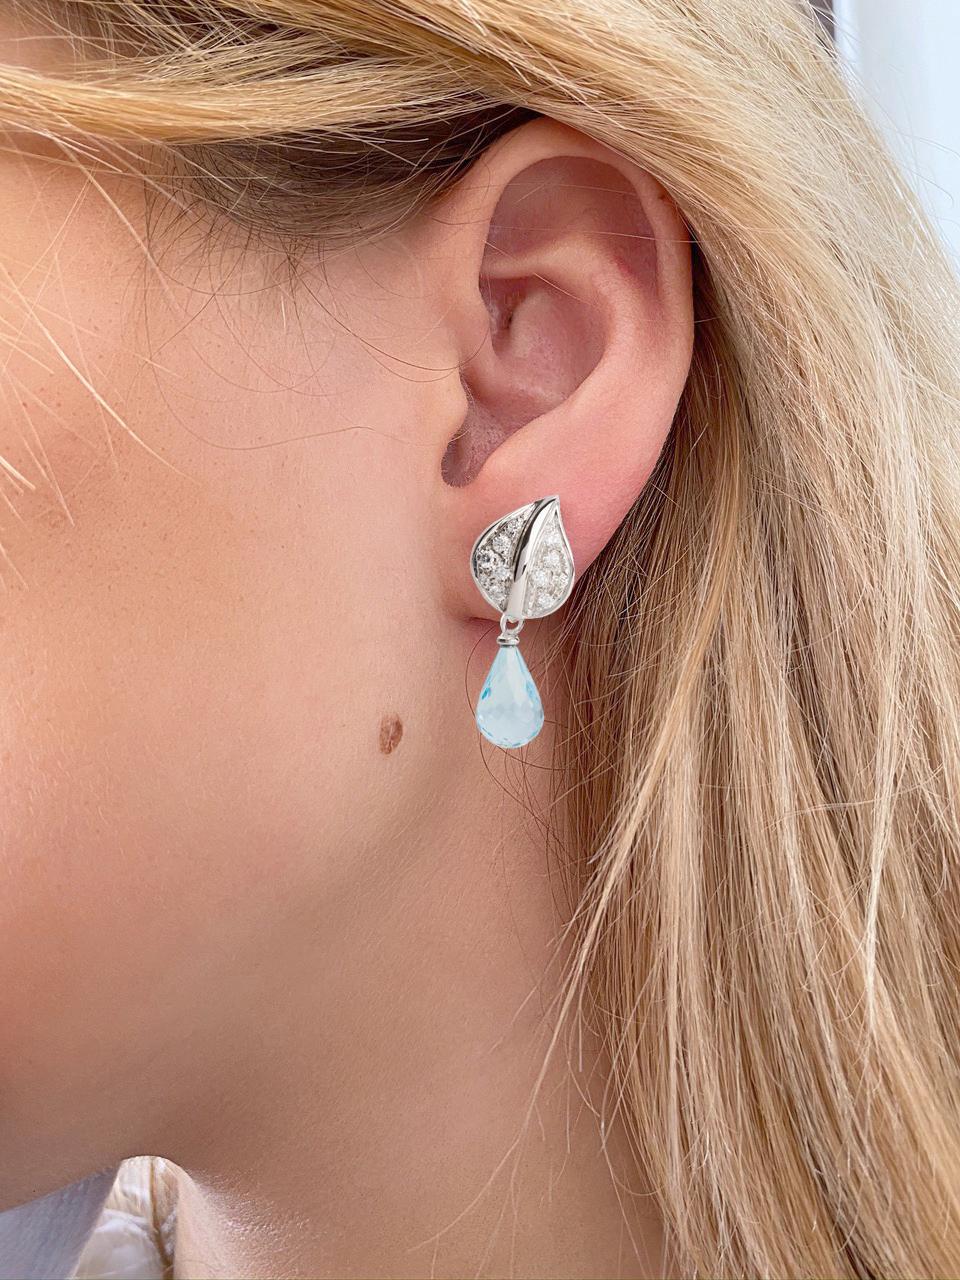 Rossella Ugolini Design Collection present  modern earrings that can be worn with or without a pendant.
They are composed of a leaf set with 0.30 white diamonds that rests on the lobe and a 4 Karats Aquamarine Briolette Cut drop- shaped that can be